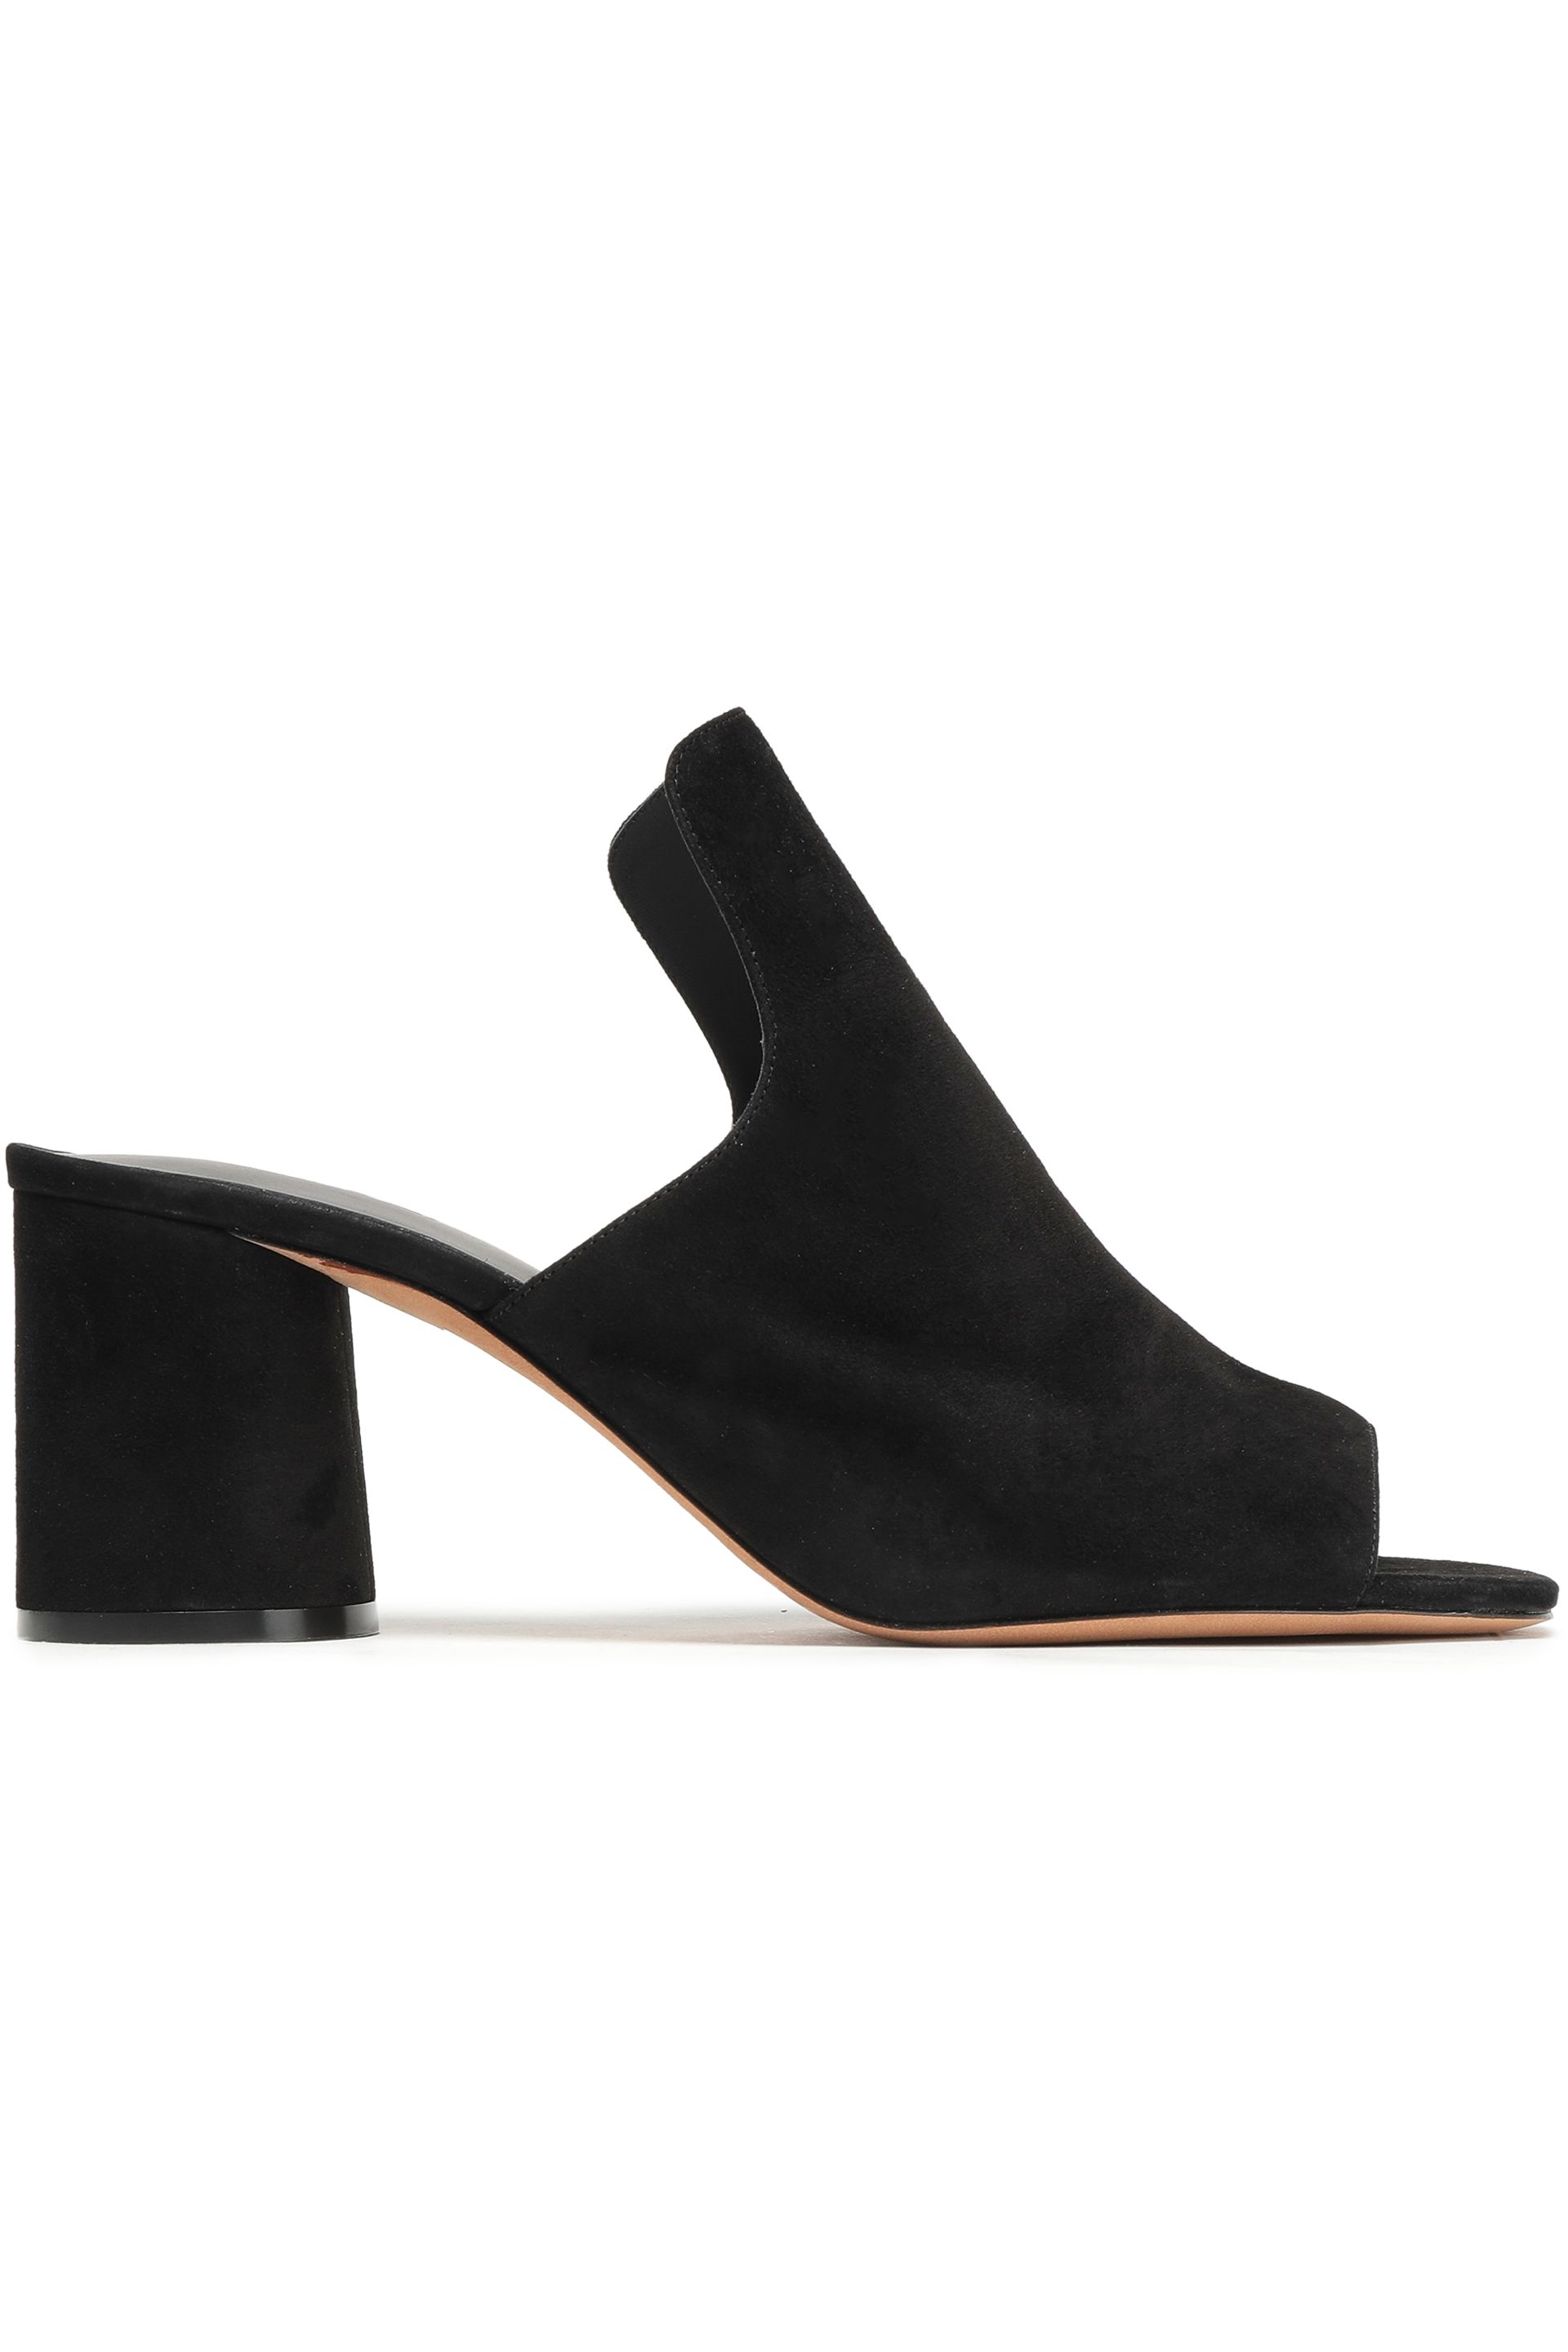 Women's Designer Mules | Sale Up To 70% Off At THE OUTNET